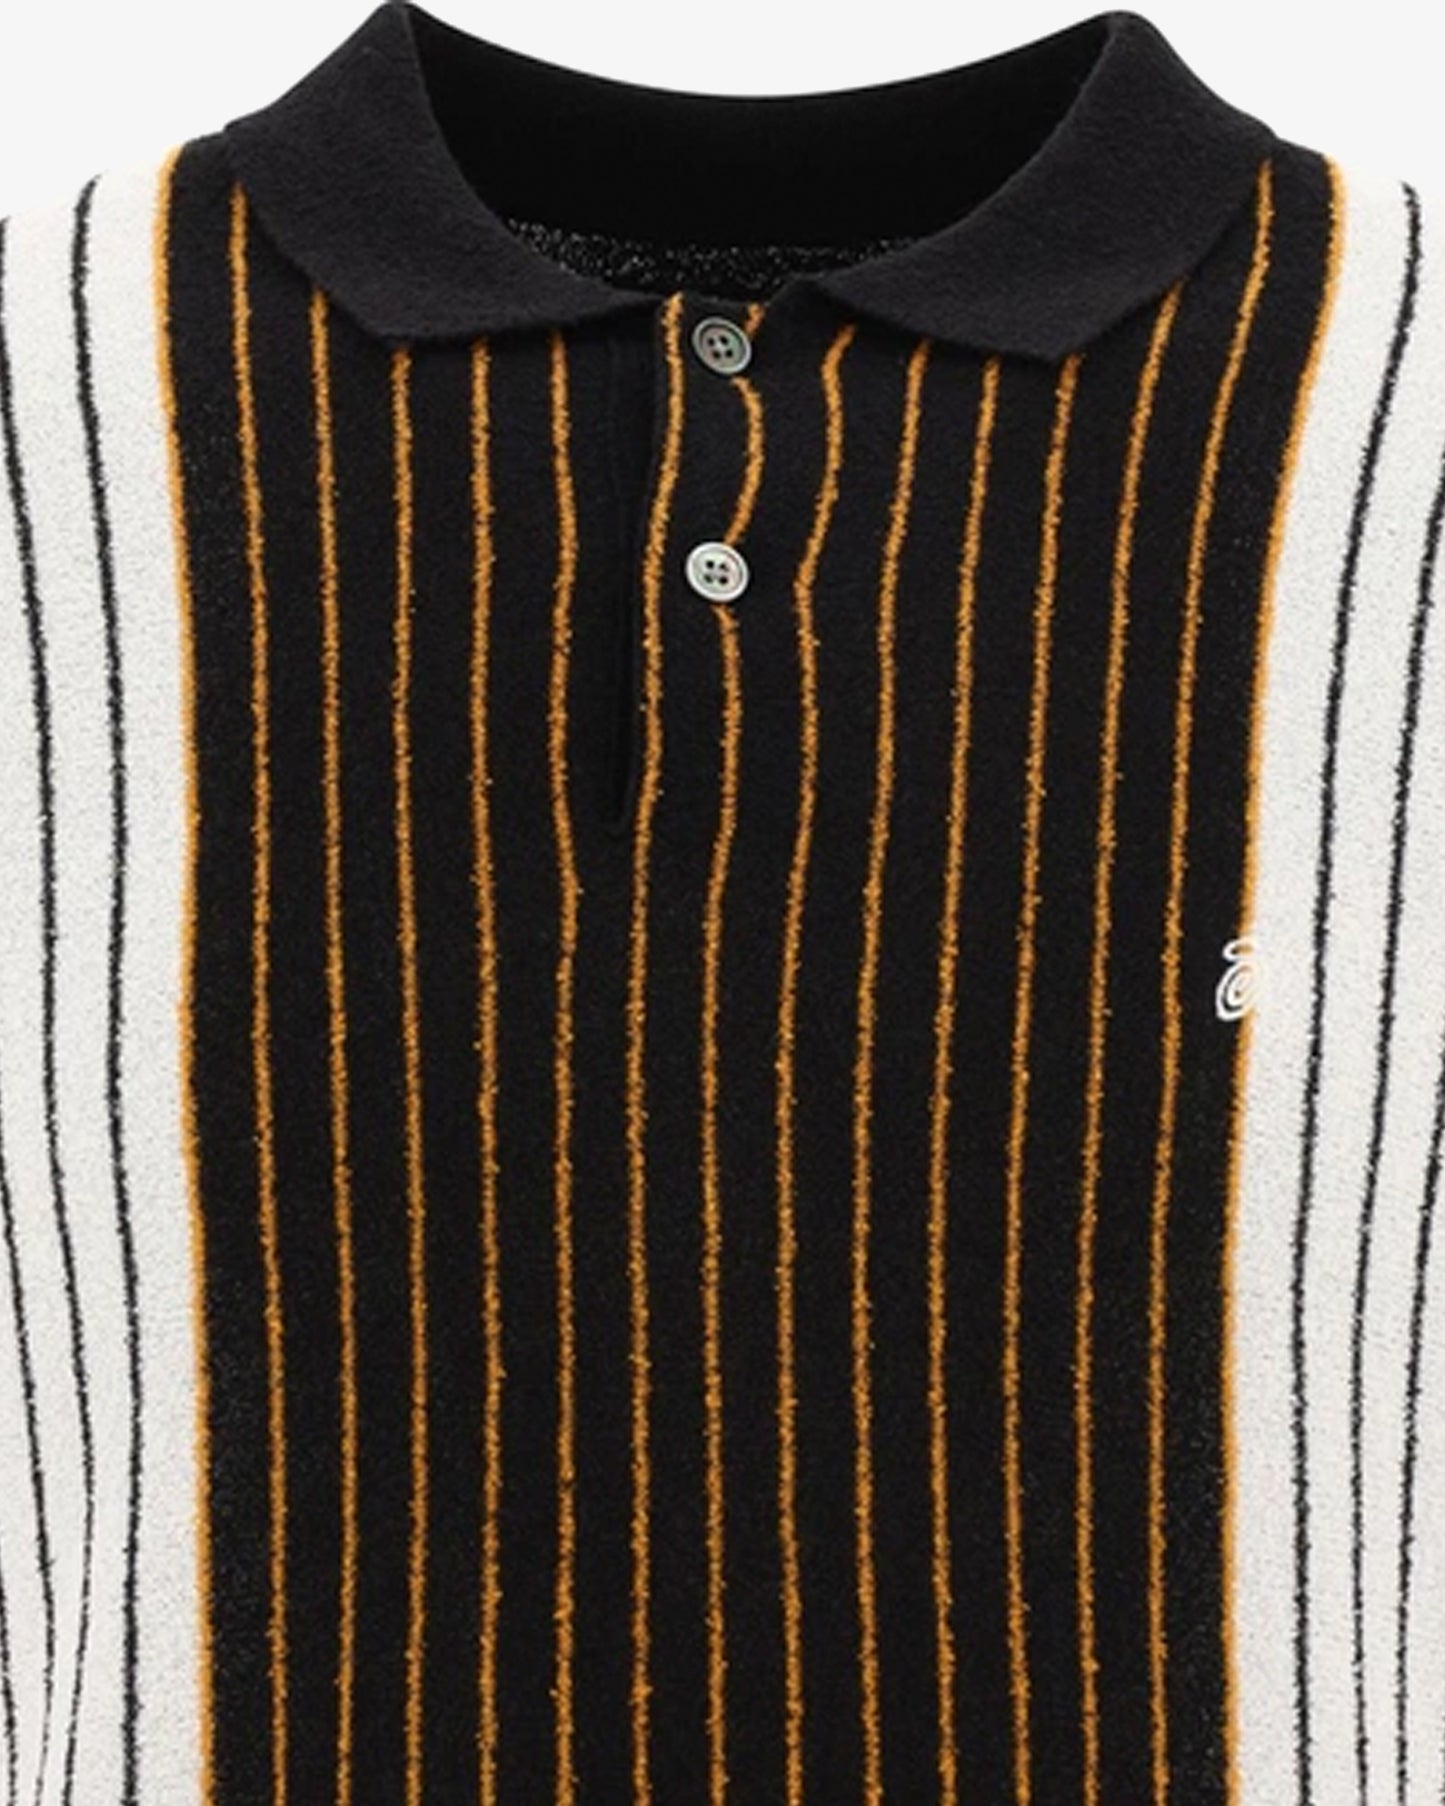 Stussy Textured SS Polo Sweater